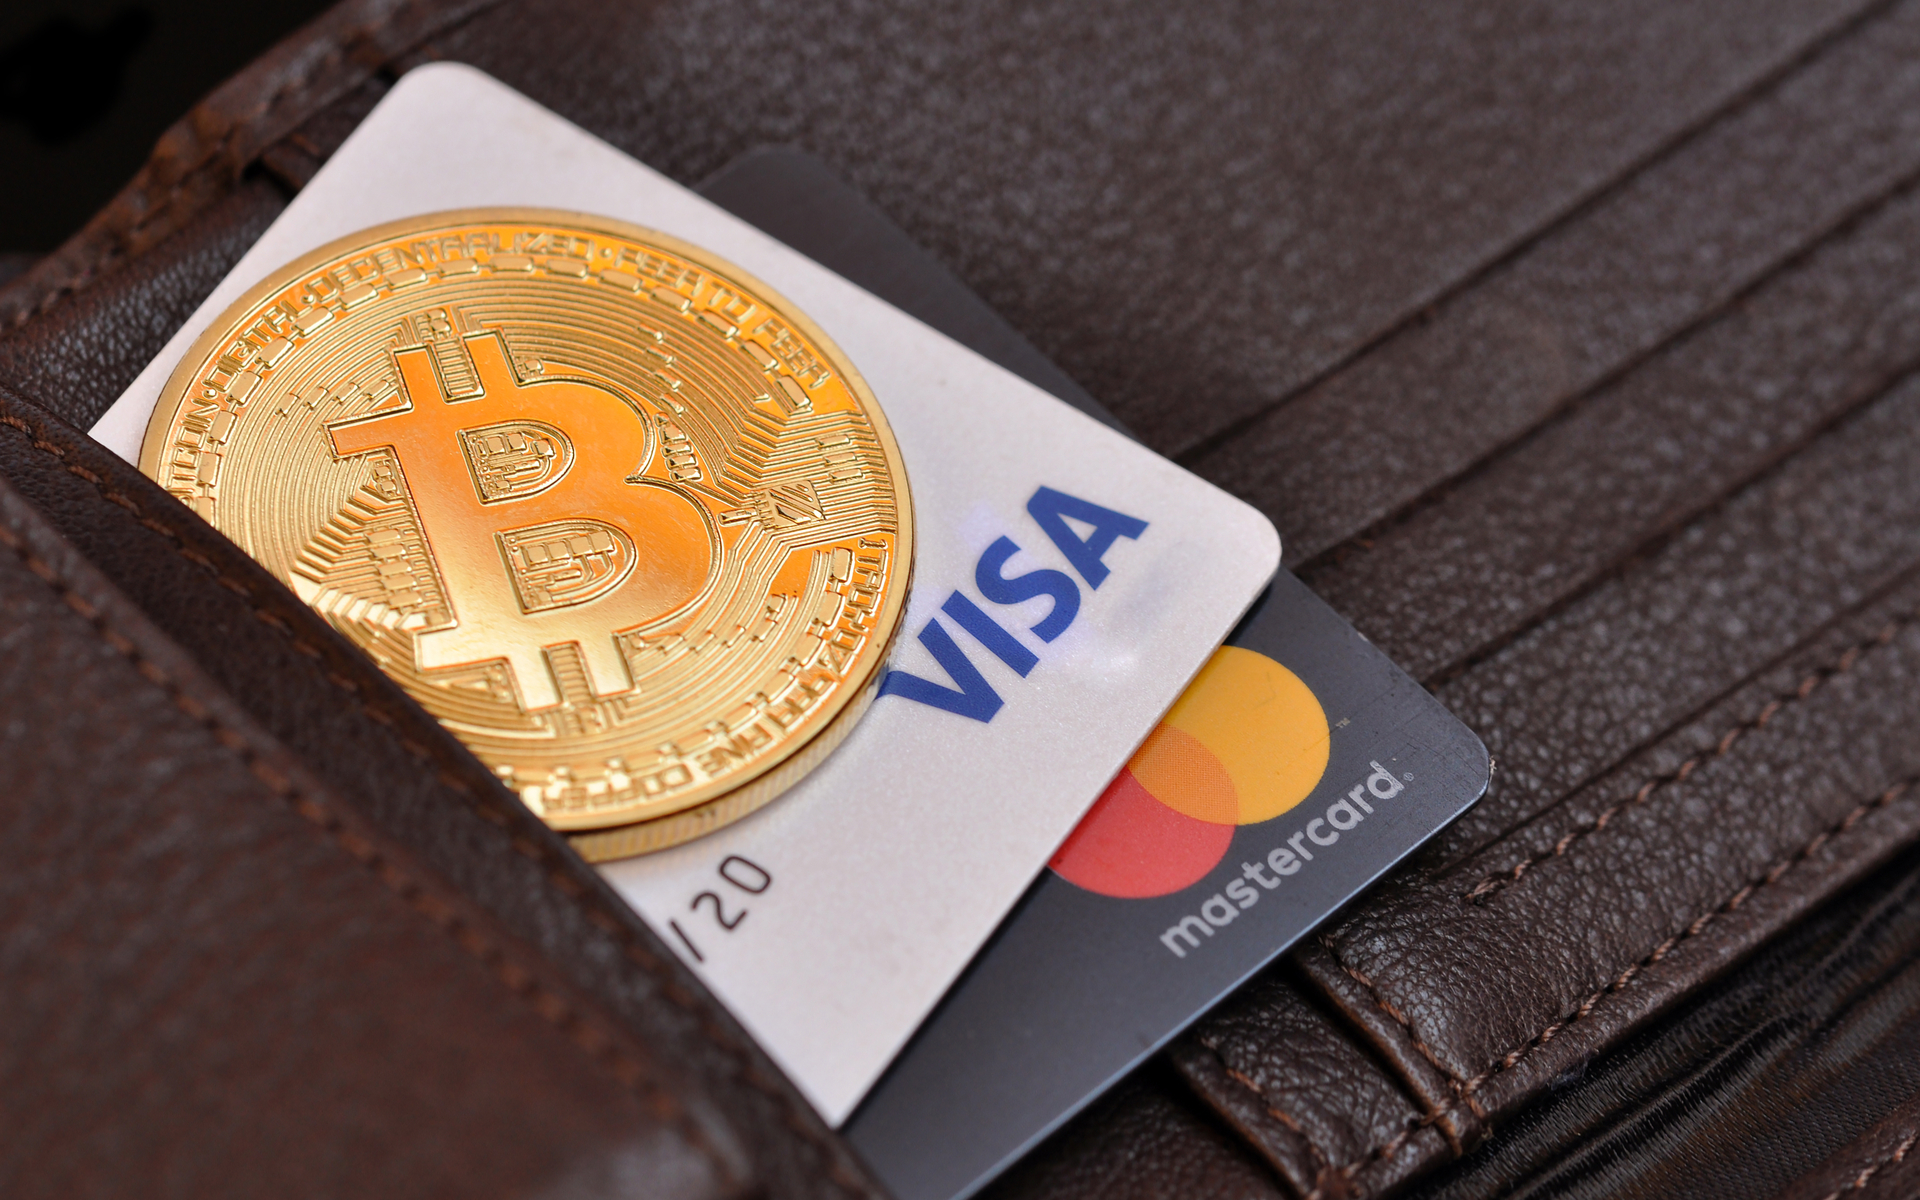 “BITCOIN TO BECOME THE MAIN PAYMENT SYSTEM IN 10 YEARS,” – DATALIGHT